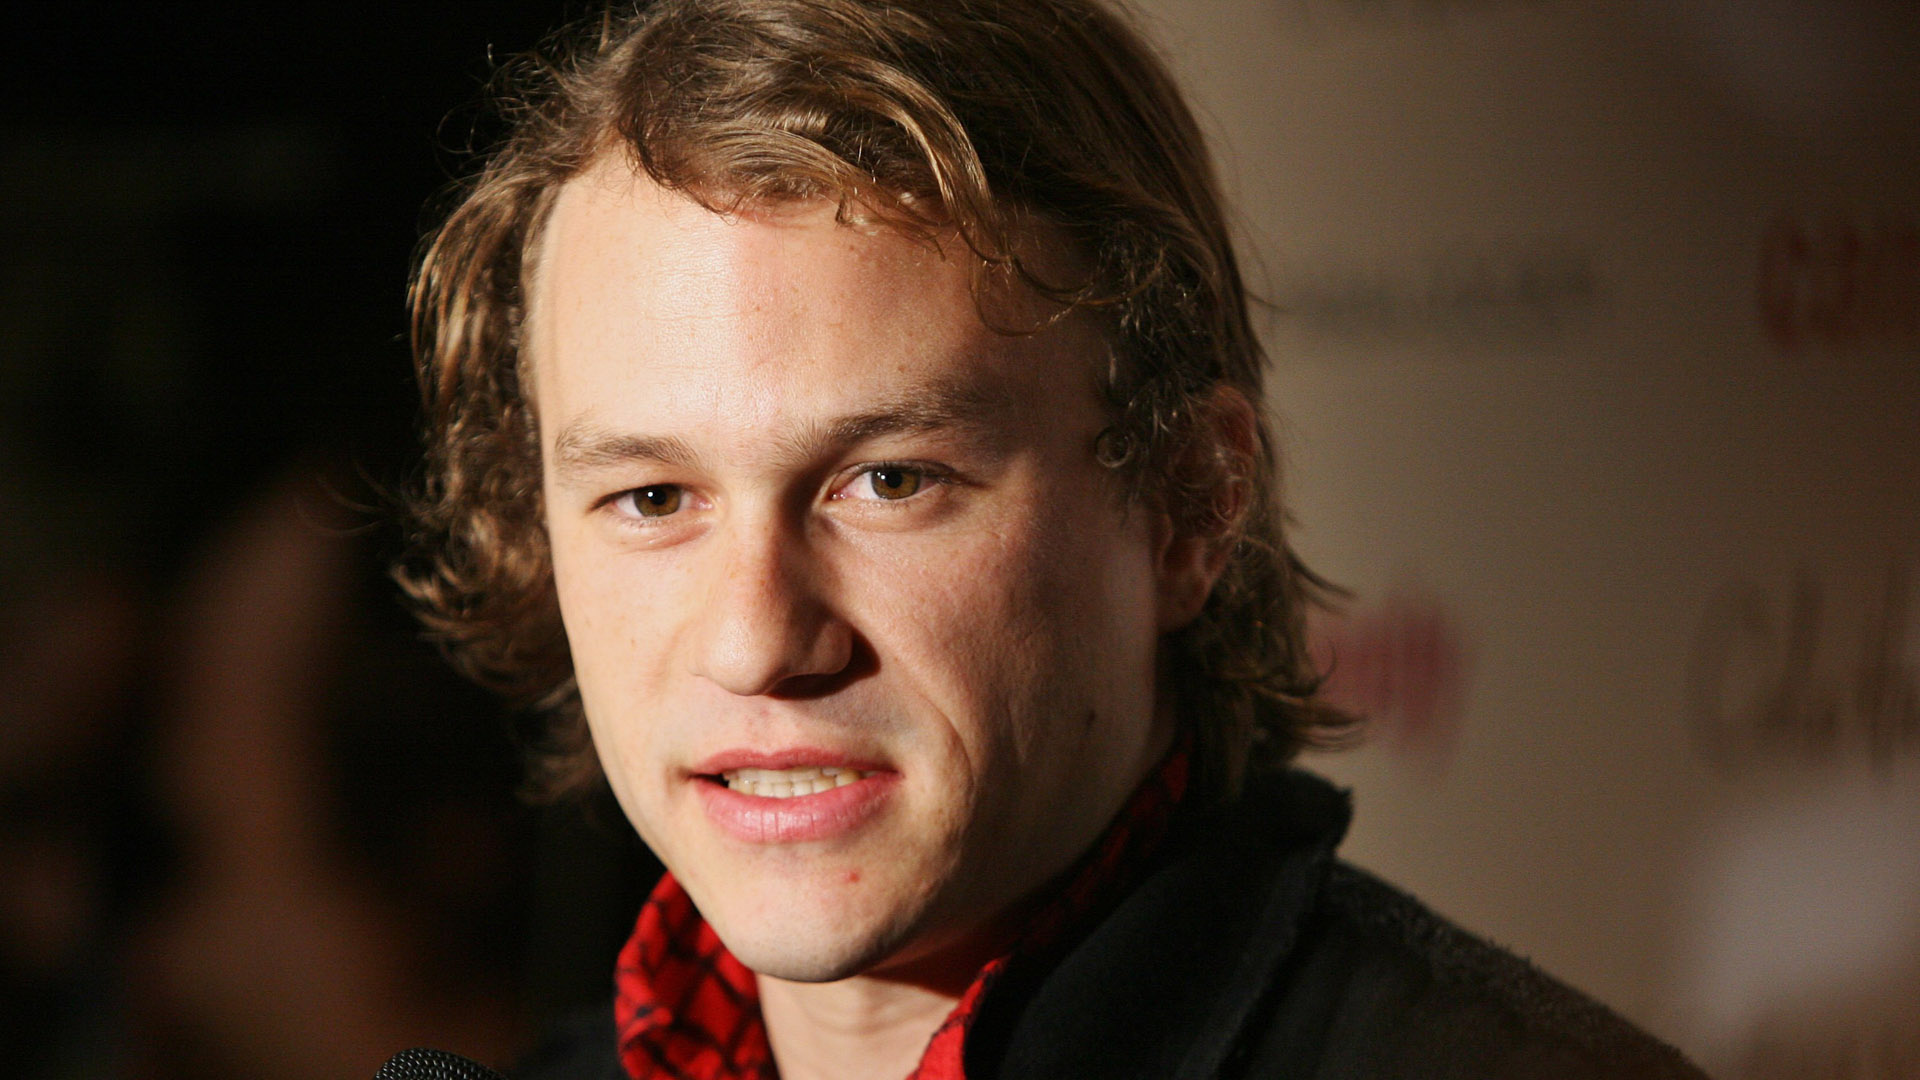 Heath Ledger, Wallpaper collection, High-quality images, Movie icon, 1920x1080 Full HD Desktop